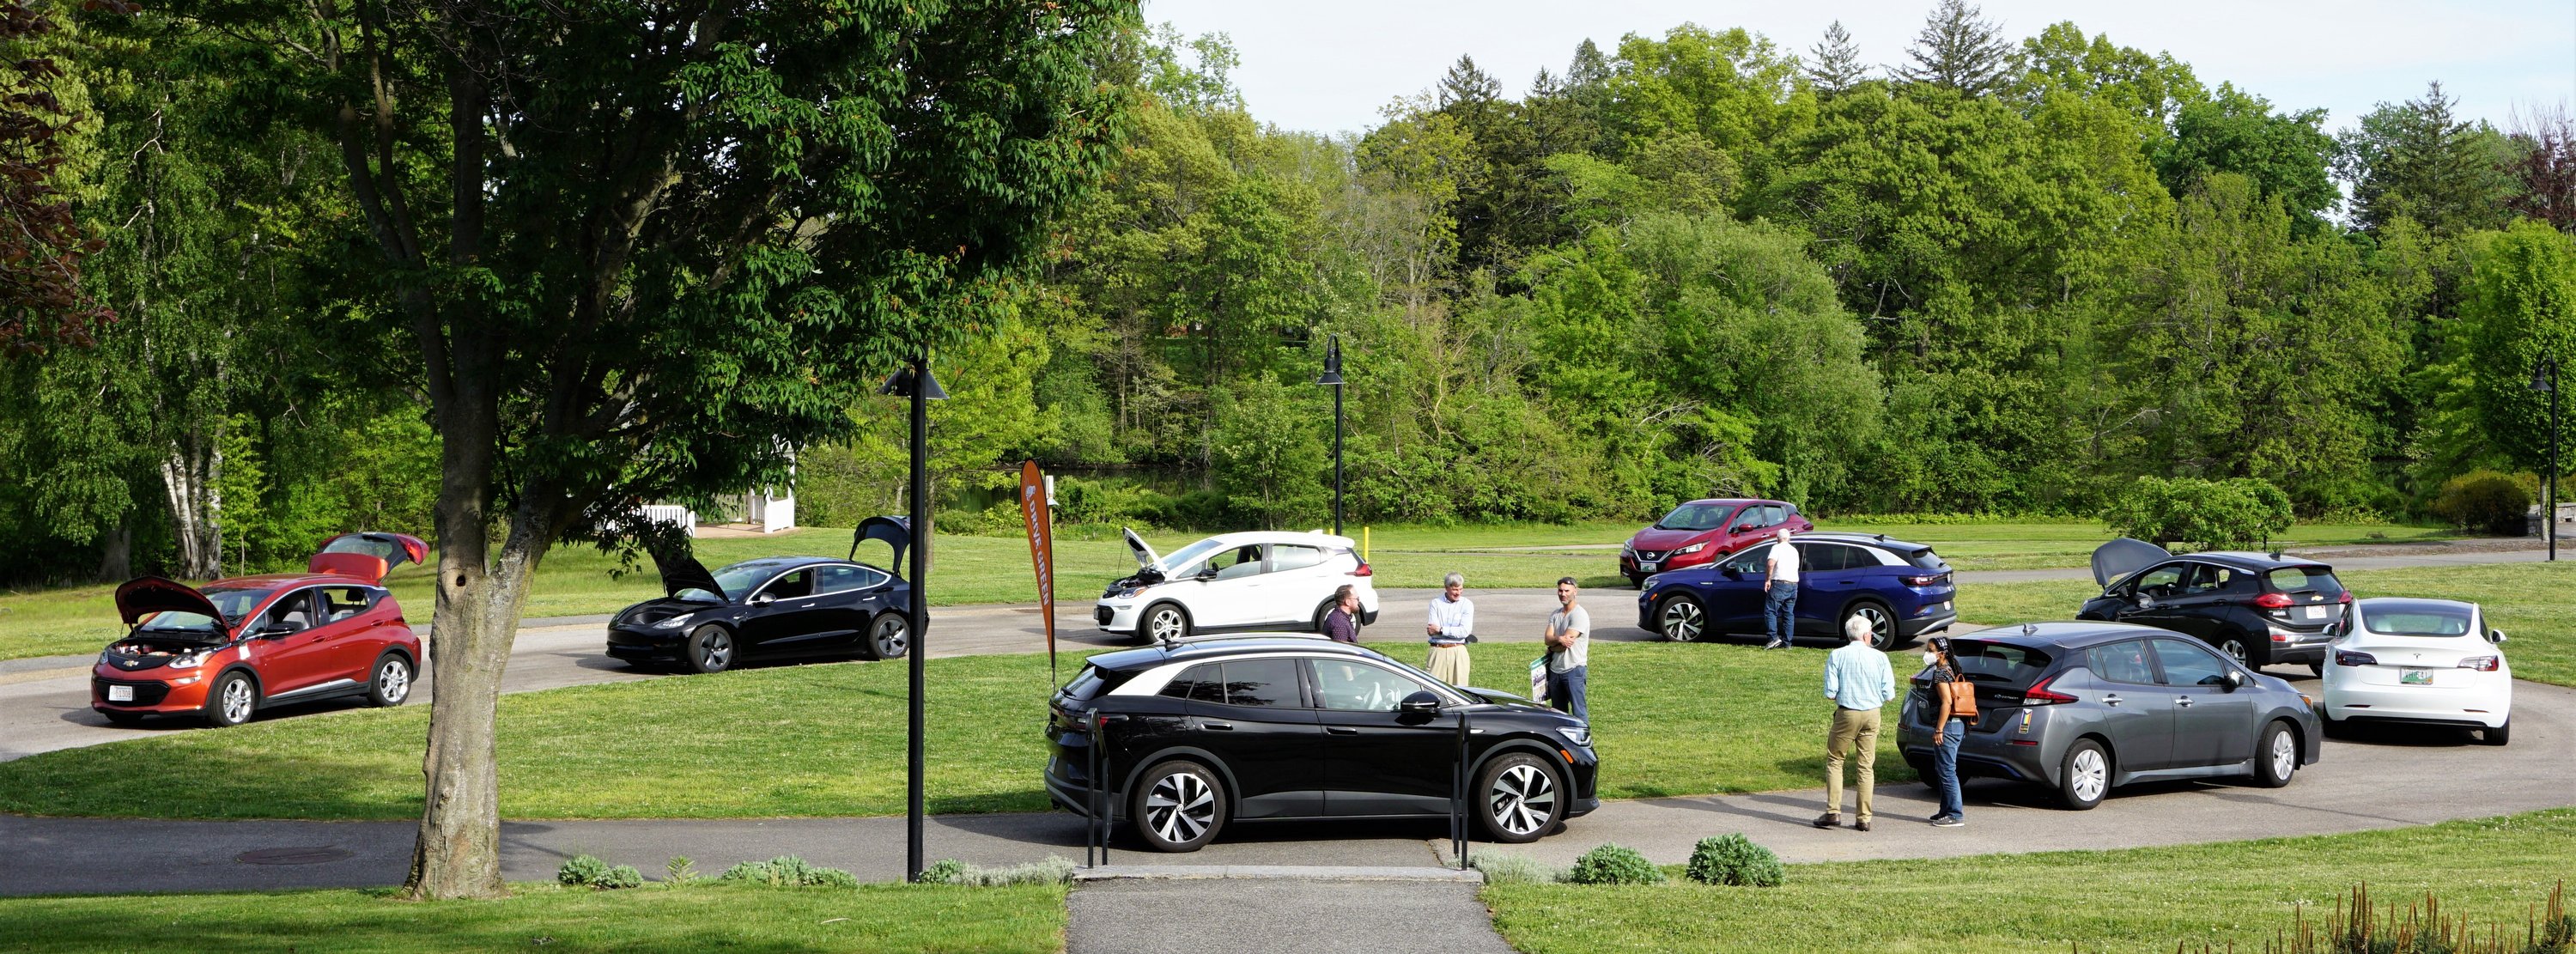 changes-to-massachusetts-electric-car-rebate-program-expected-july-1